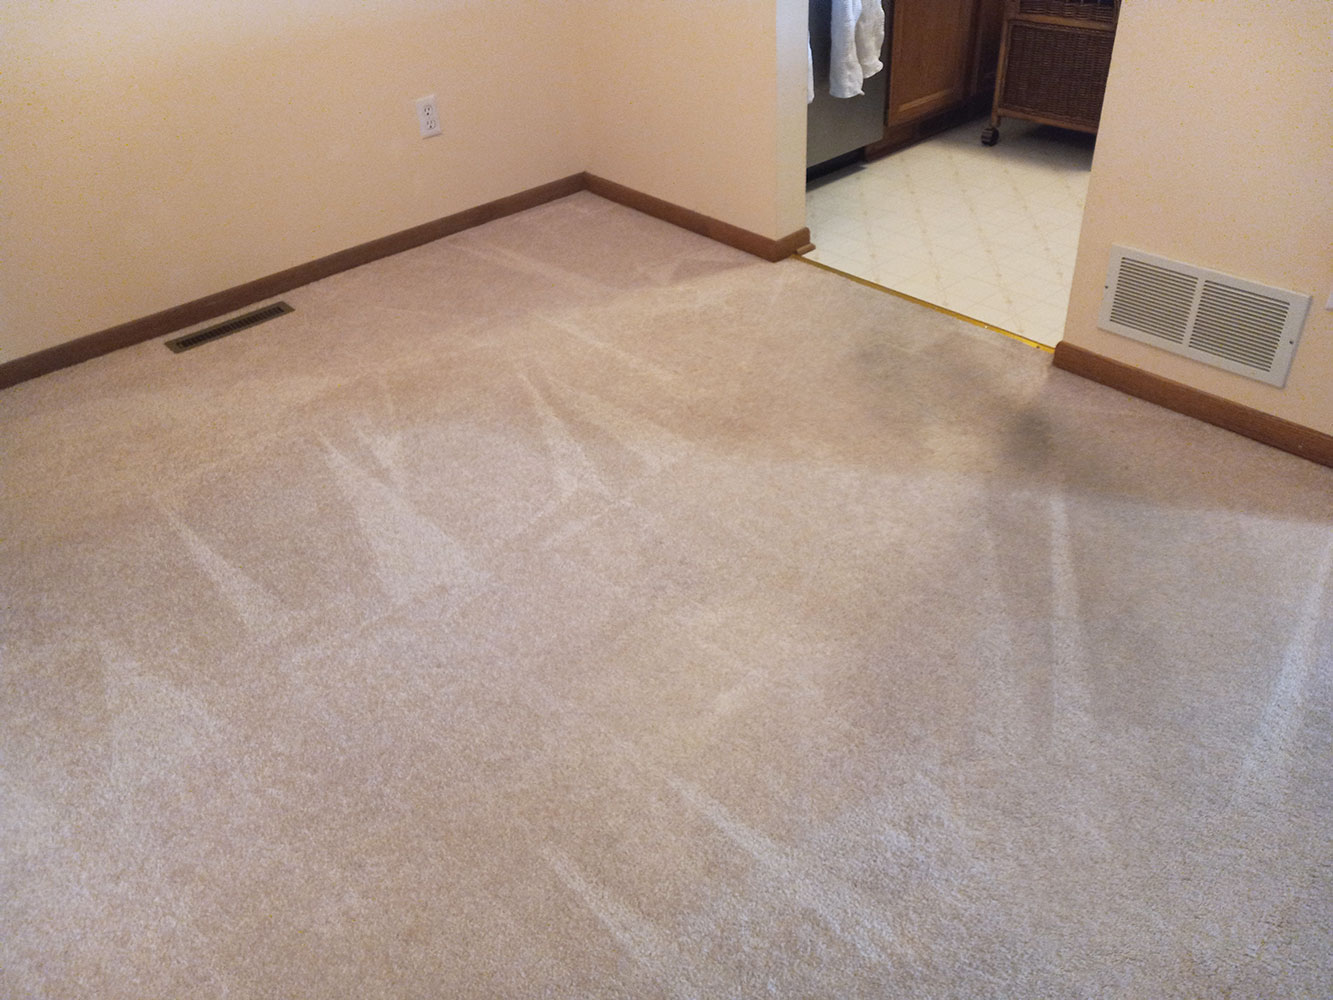 Dining Room, After: Carpet with Heavy Traffic Stains